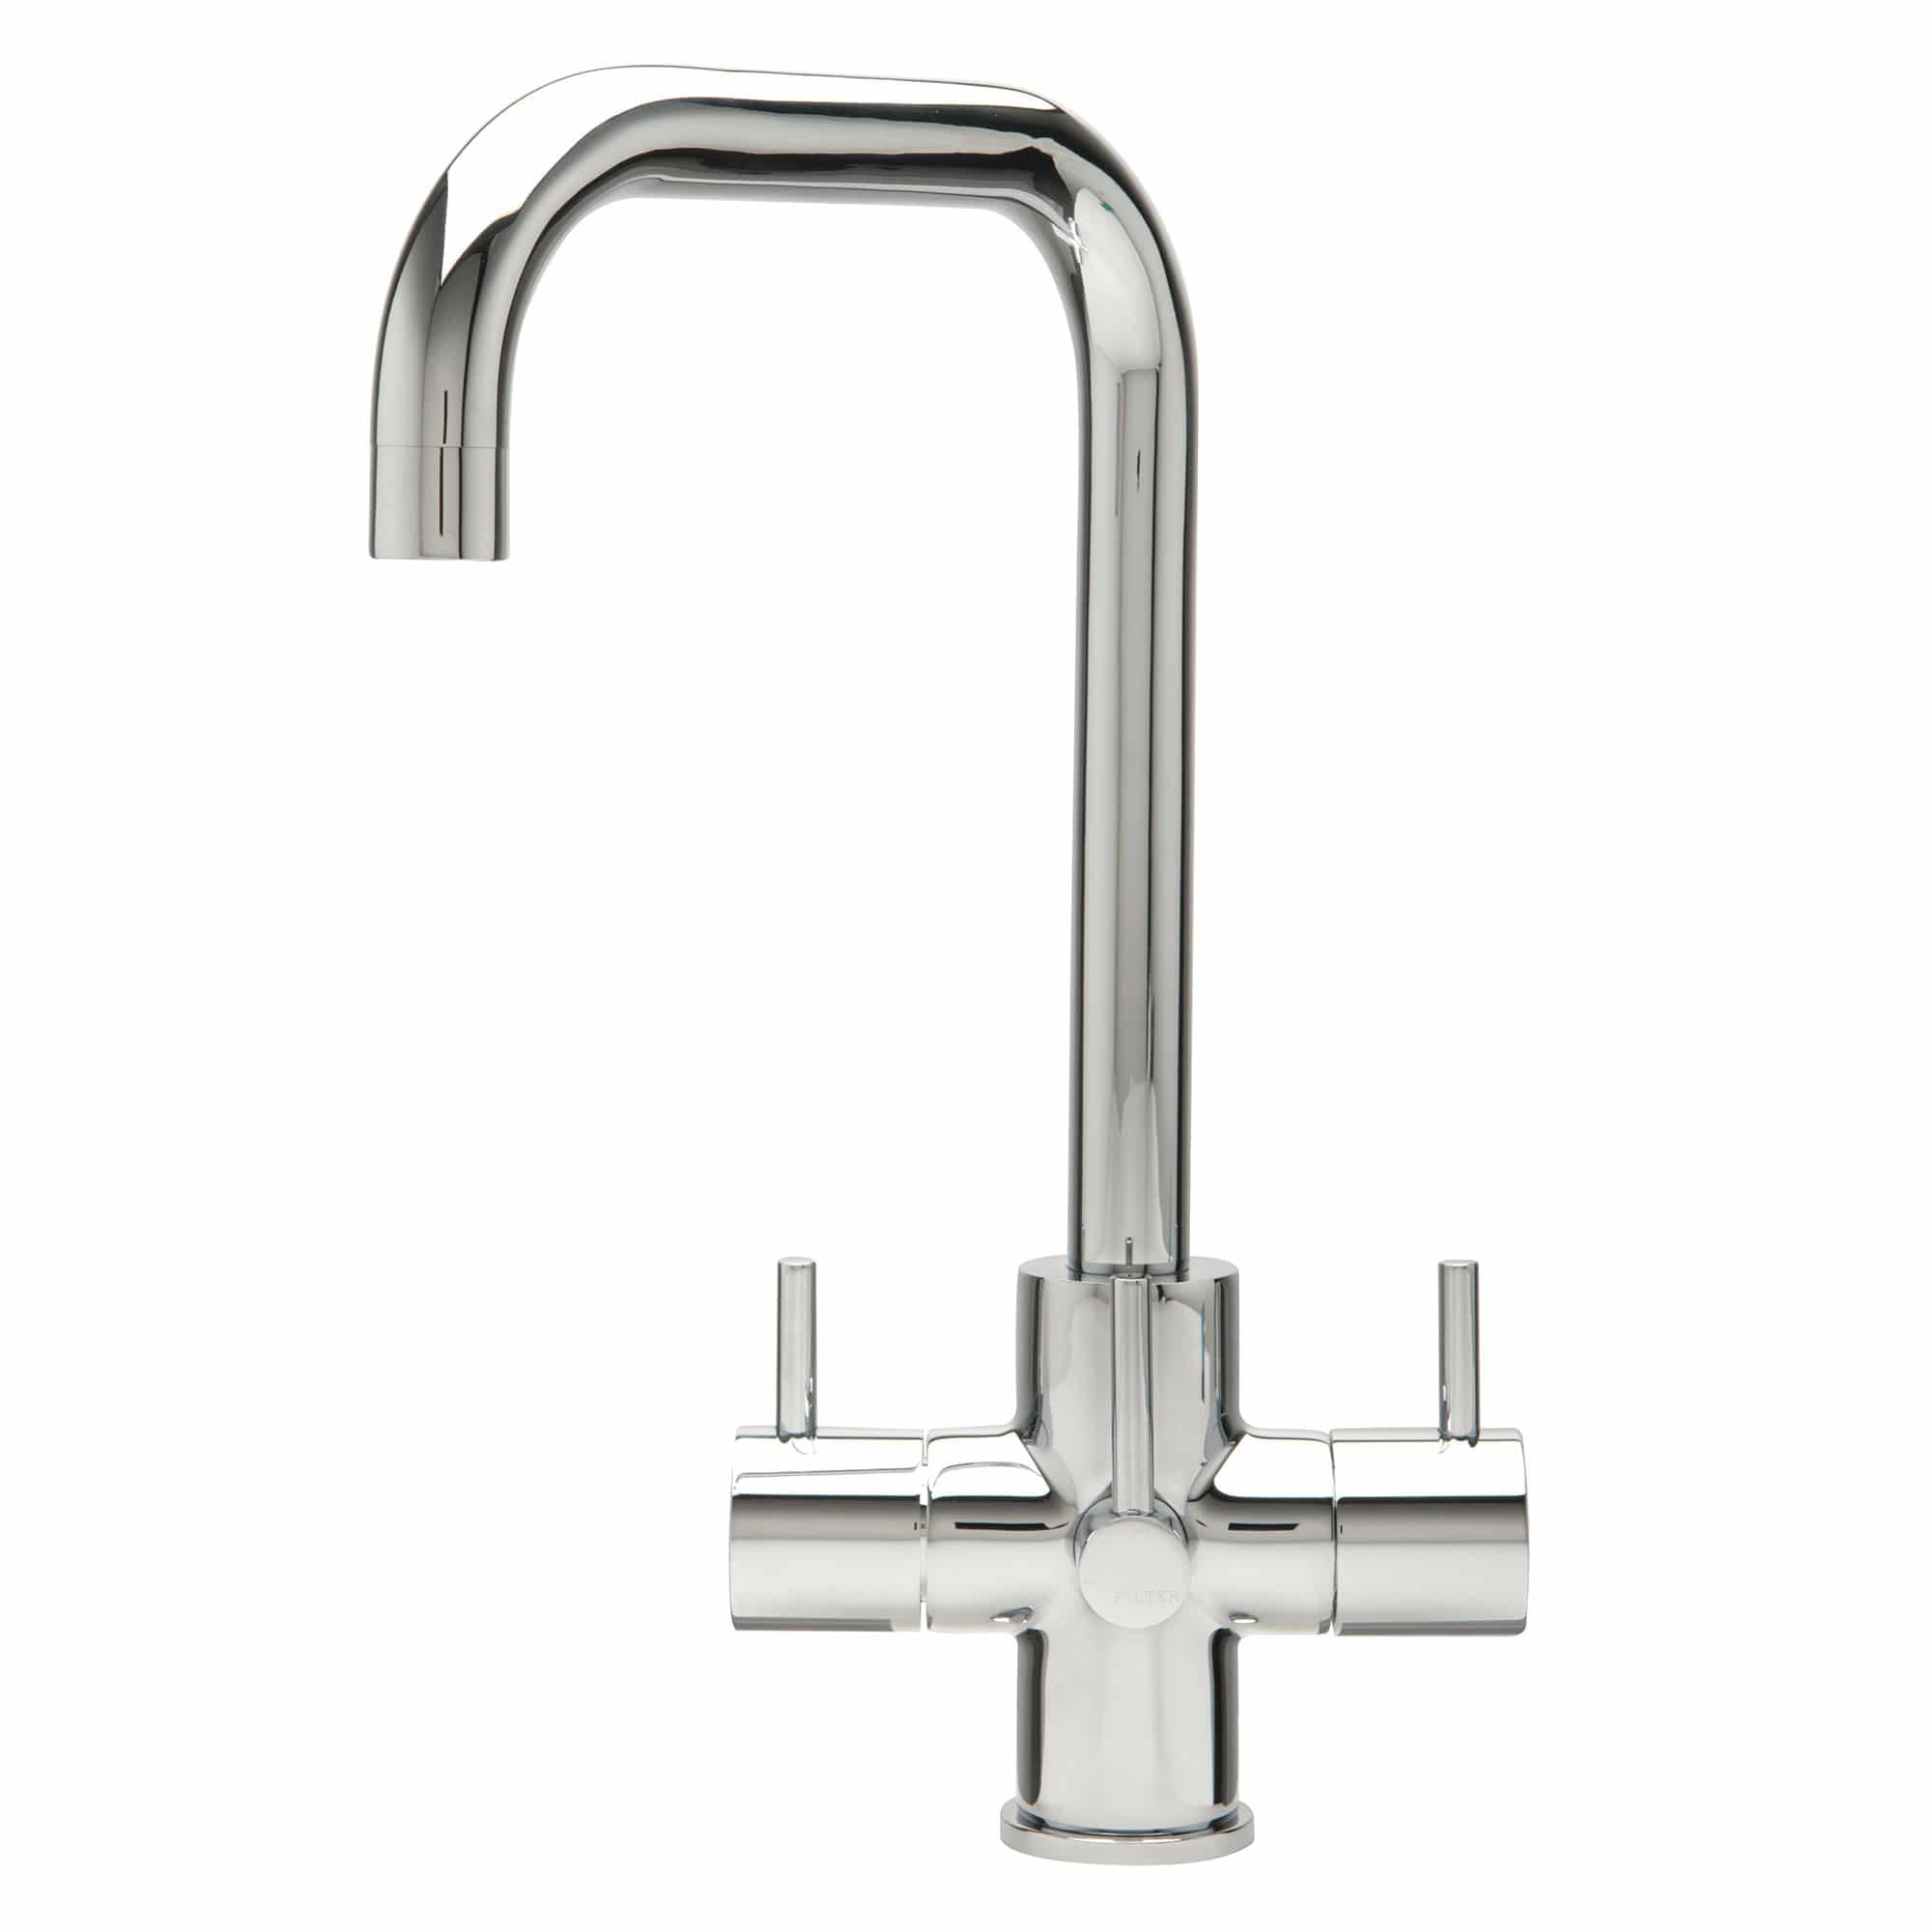 Caple Caple Atmore Puriti Filter Tap Polished Chrome FILTER NOT INCLUDED 